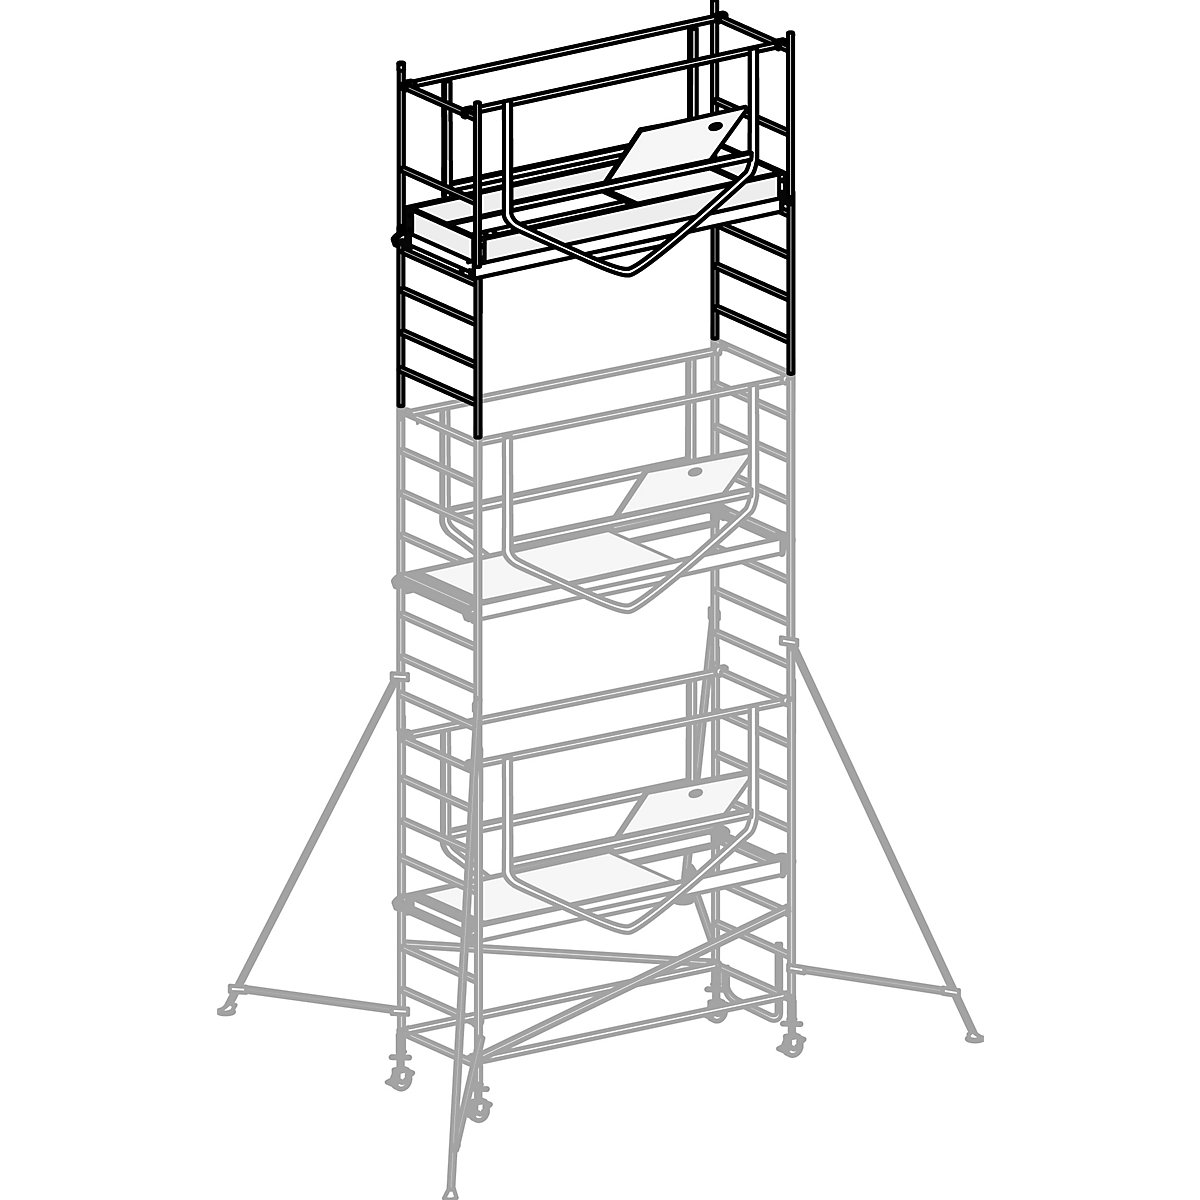 ADVANCED SAFE-T 7070 mobile access tower - HYMER